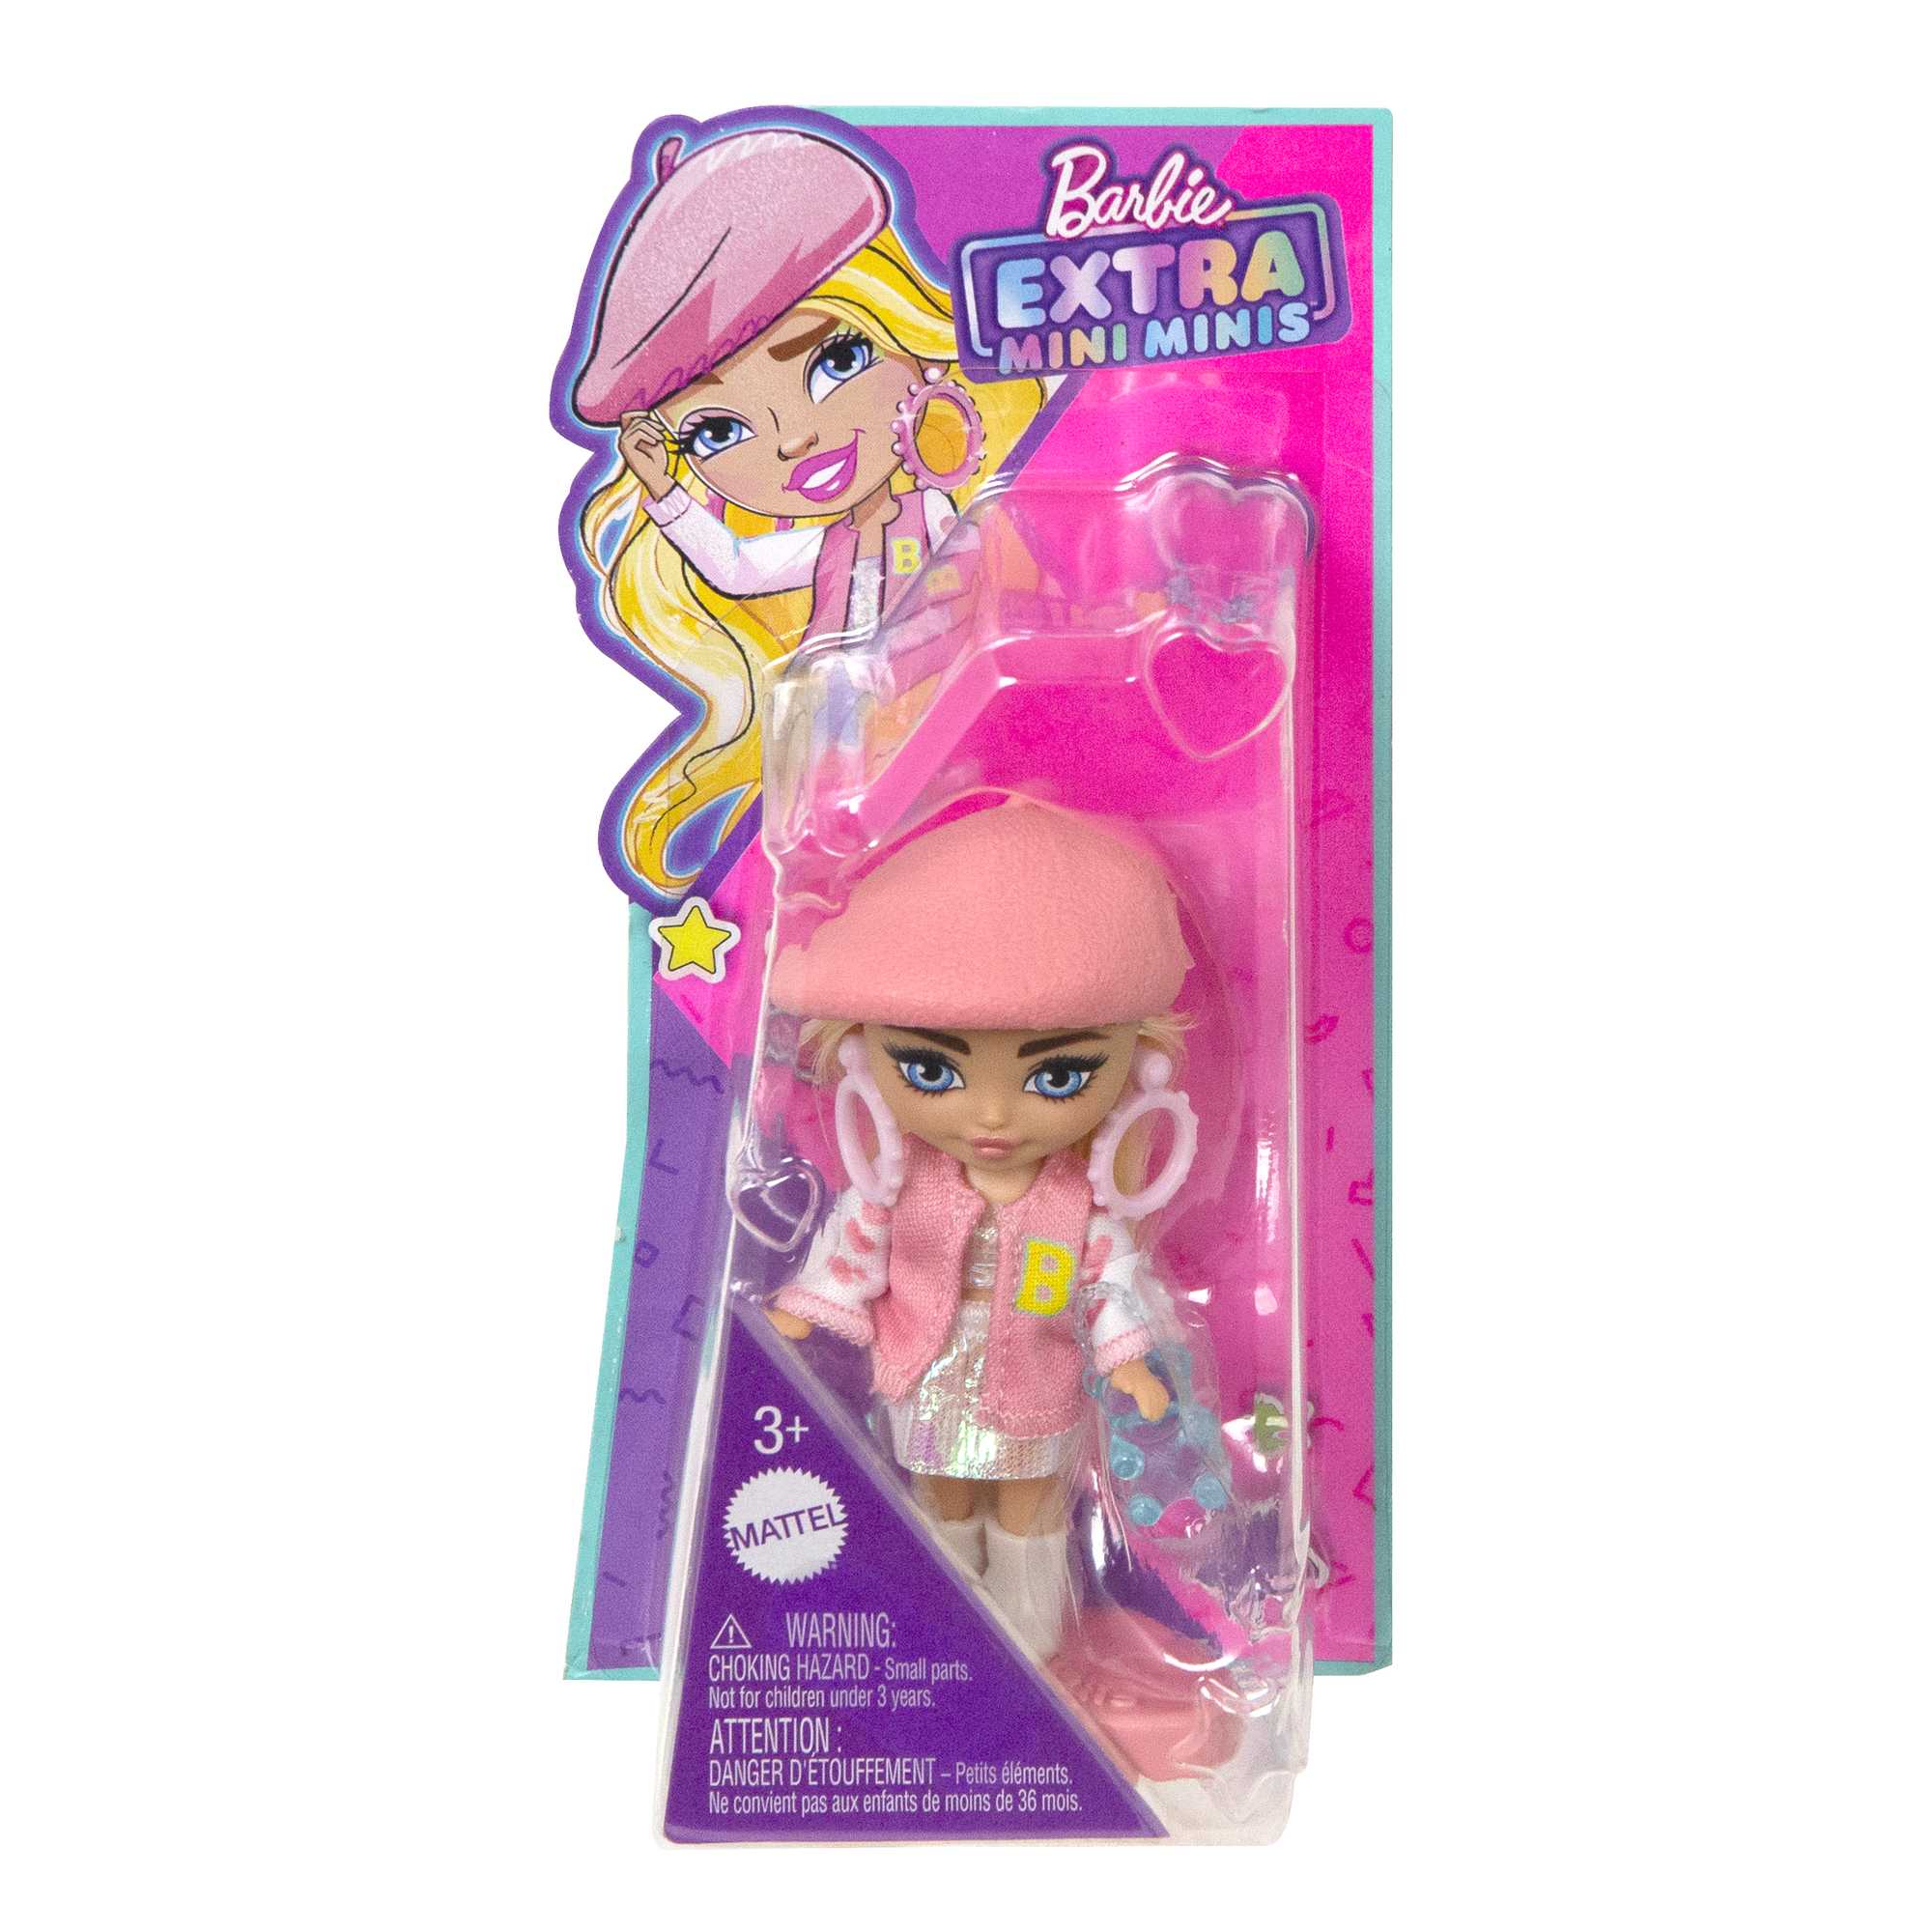 Barbie Extra Minis – Jenjoy's All Dolled Up Page